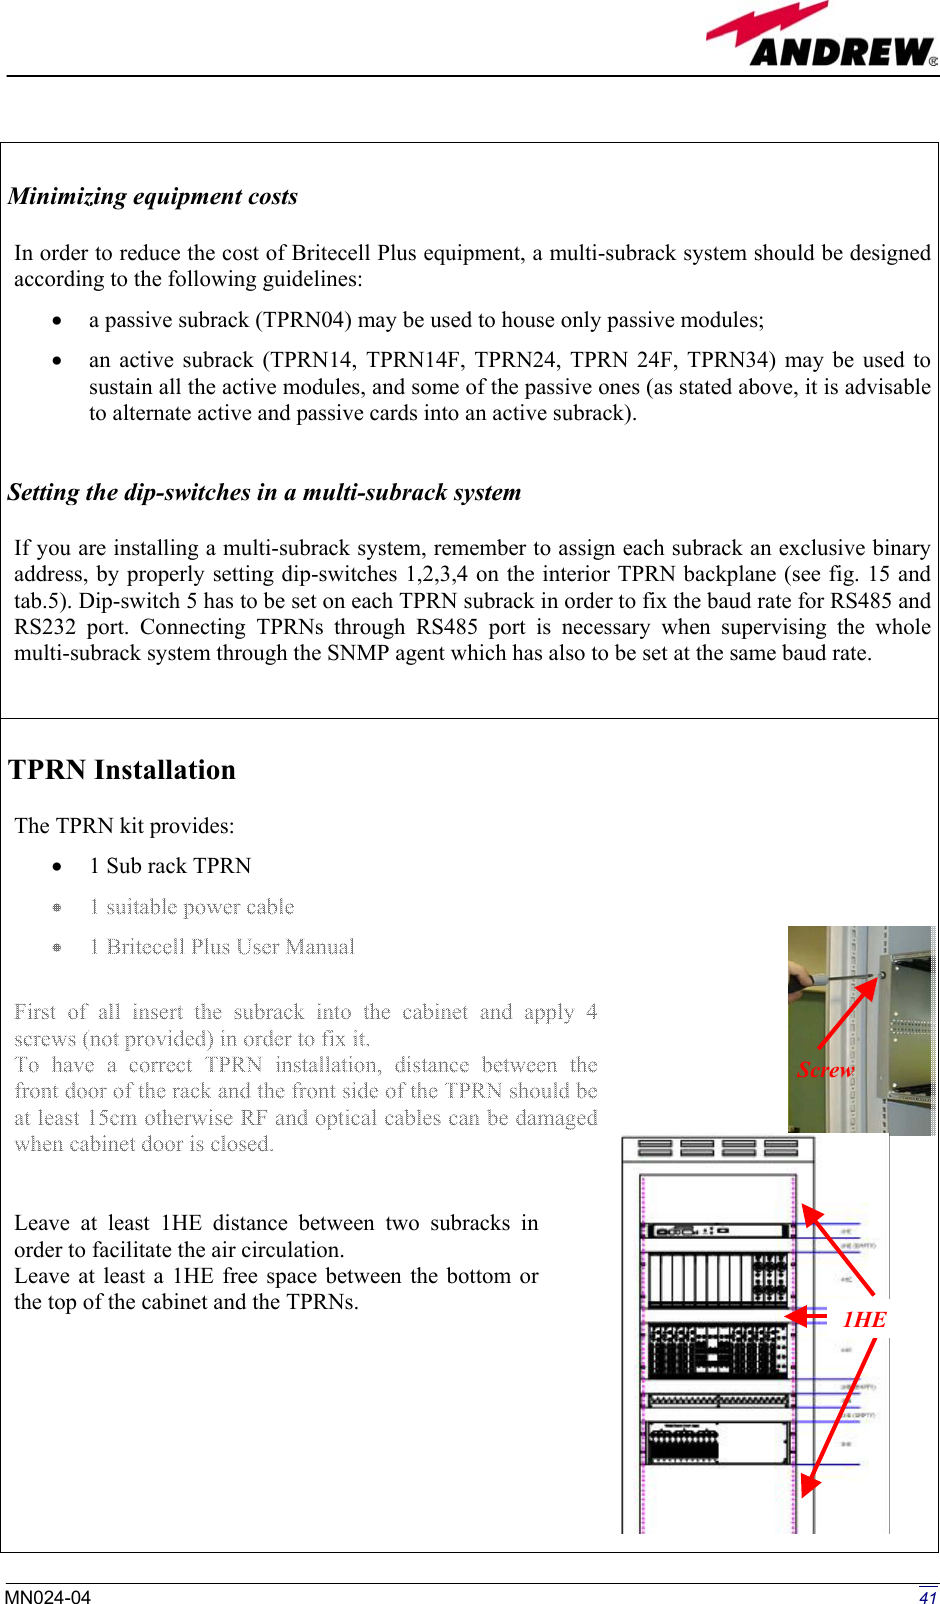 Page 16 of Andrew Wireless Innovations Group BCP-TFAM26 Model TFAM26 Downlink Booster User Manual 